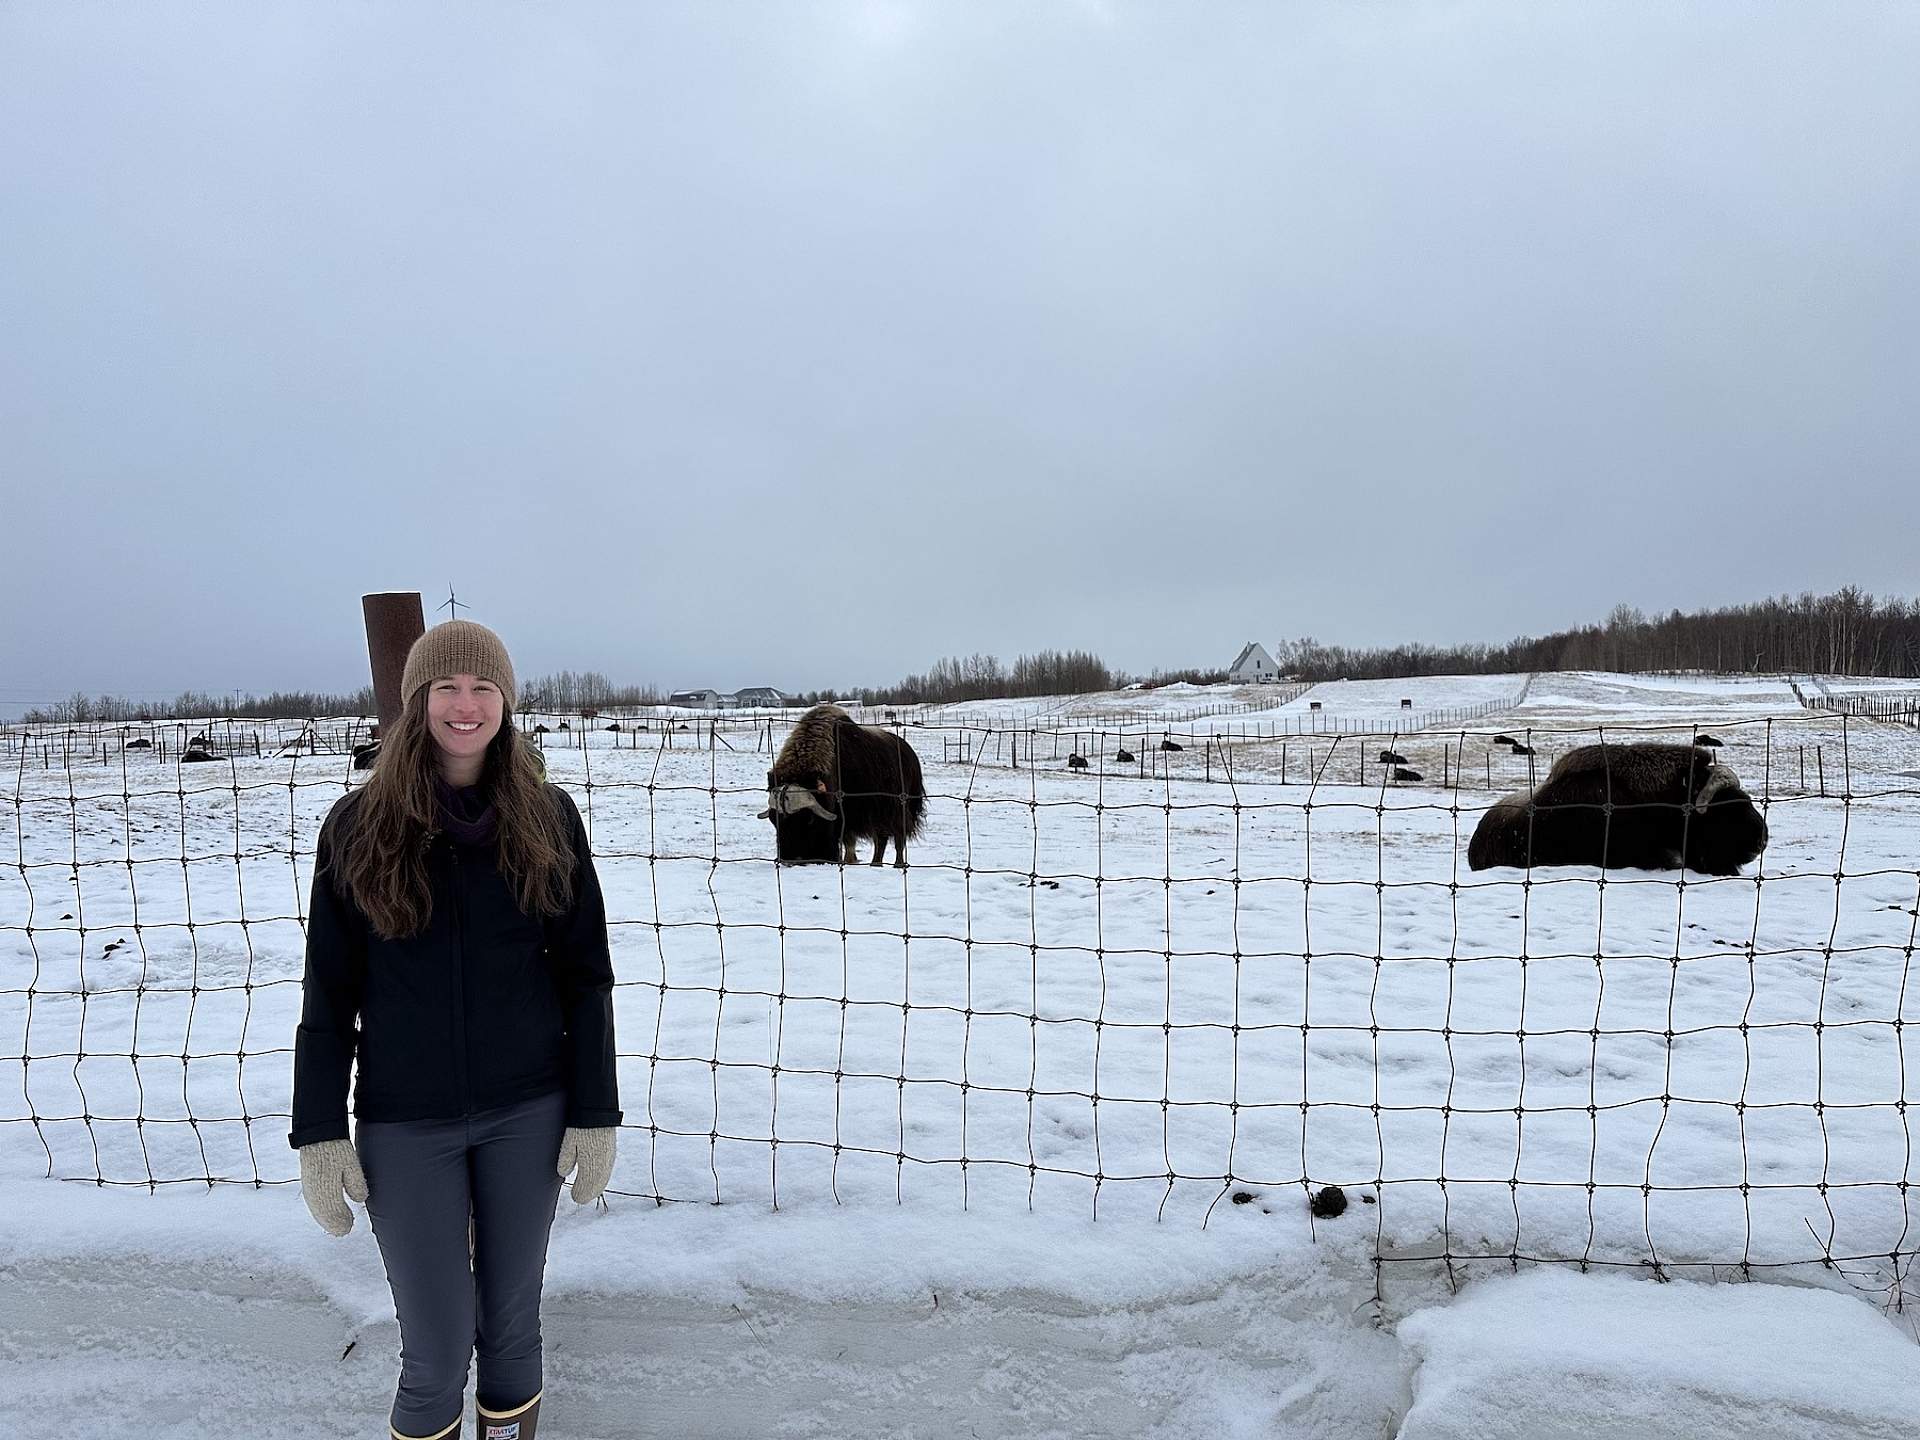 Tour guide Dani smiles in front of a herd of musk oxen at the Musk Ox Farm in Palmer, Alaska